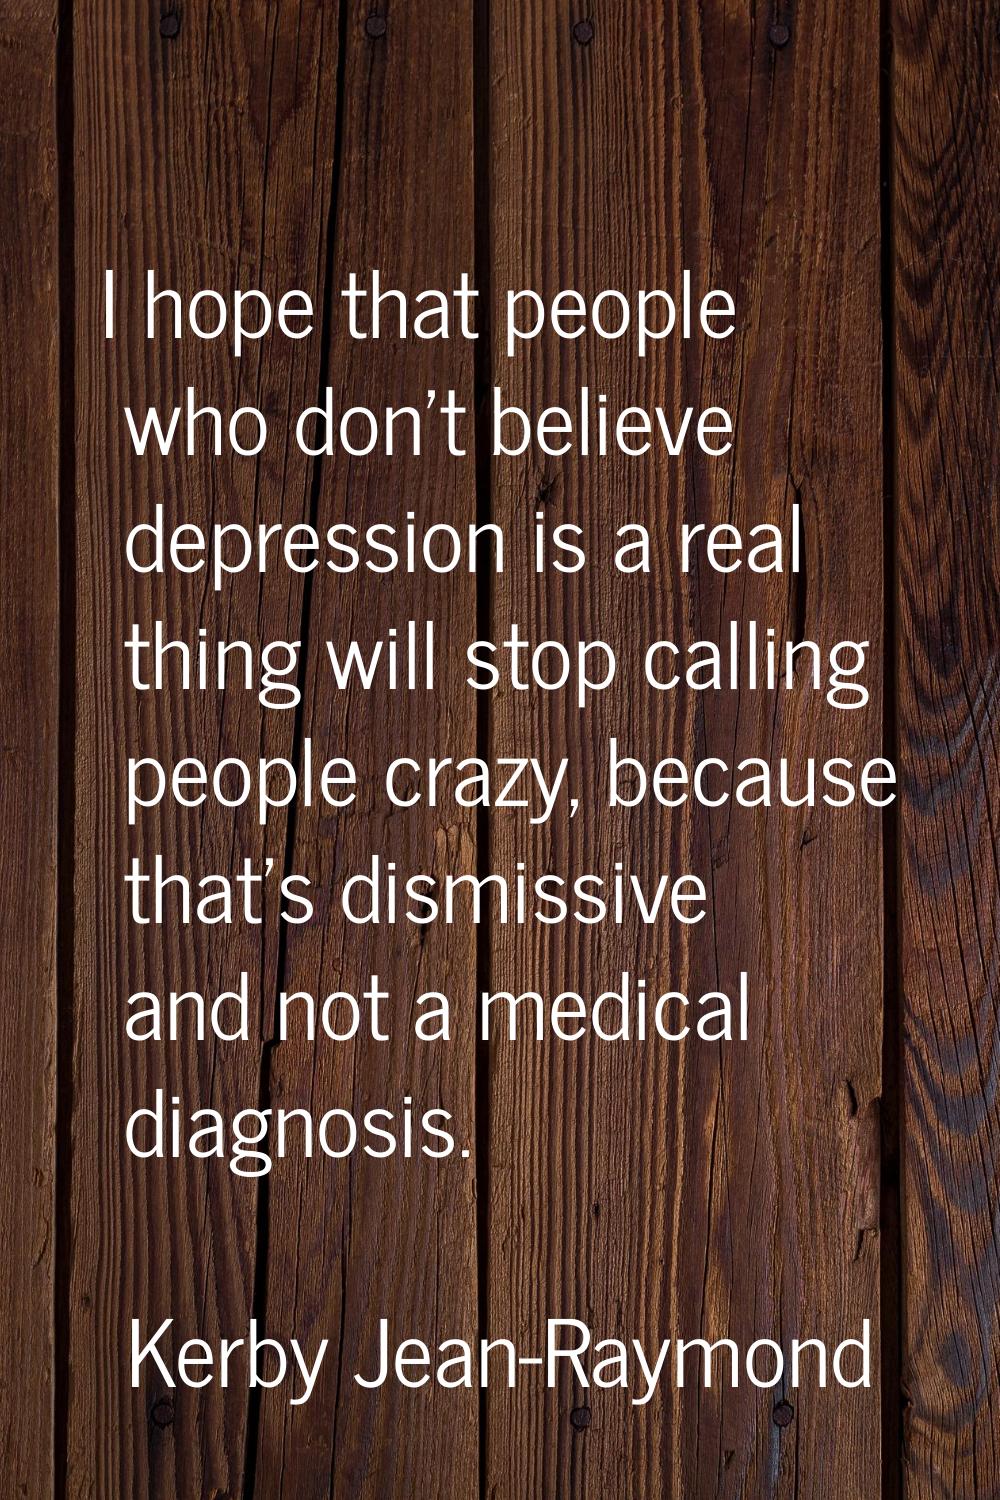 I hope that people who don't believe depression is a real thing will stop calling people crazy, bec